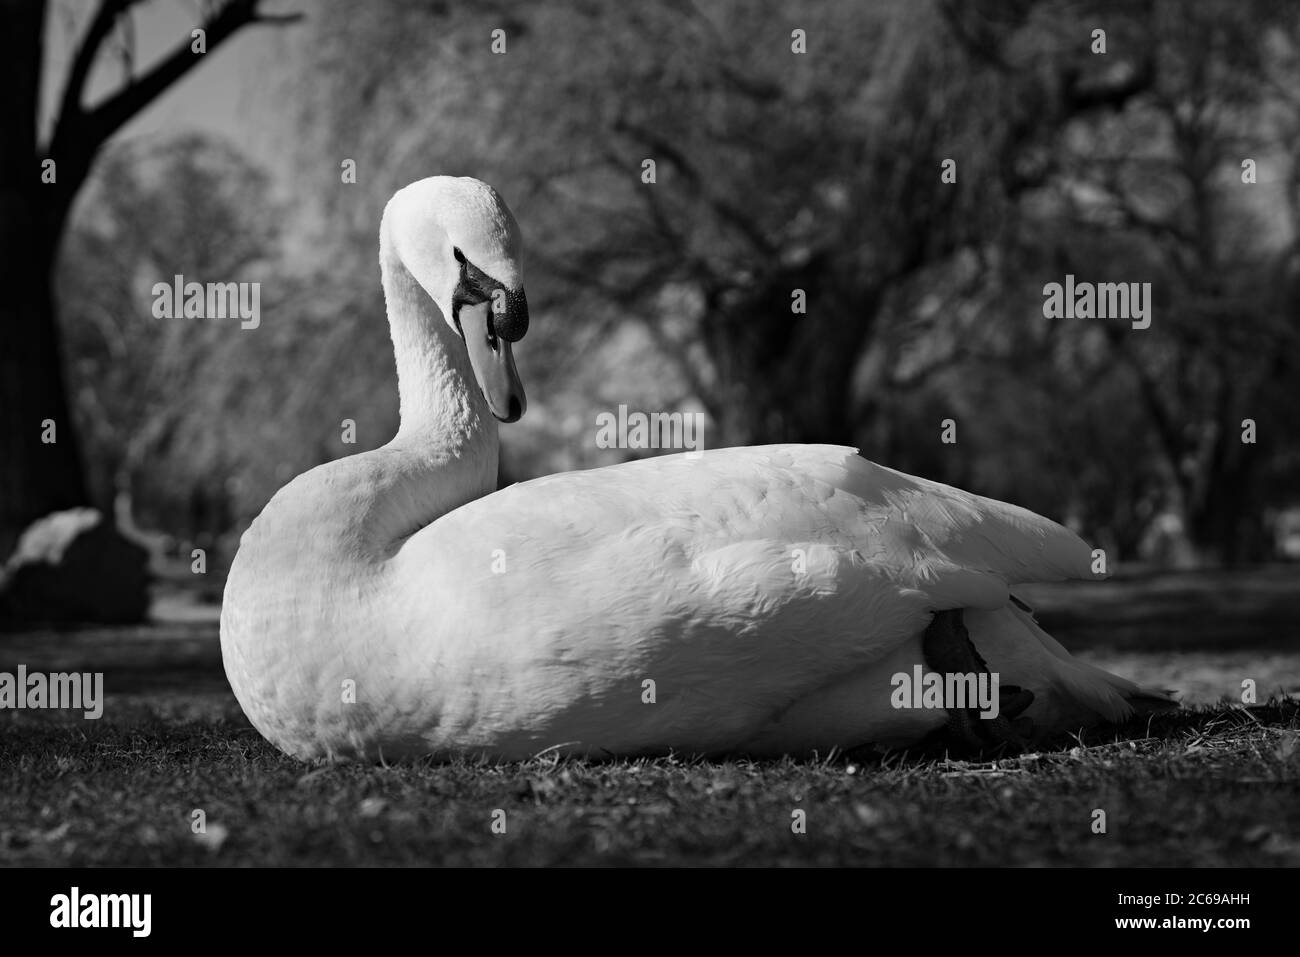 KOSICE-BARCA, SLOVAKIA, APRIL 12 2020: A free-living white adult swan sitting on the grass in a local park with blurry background trees; a close-up pi Stock Photo